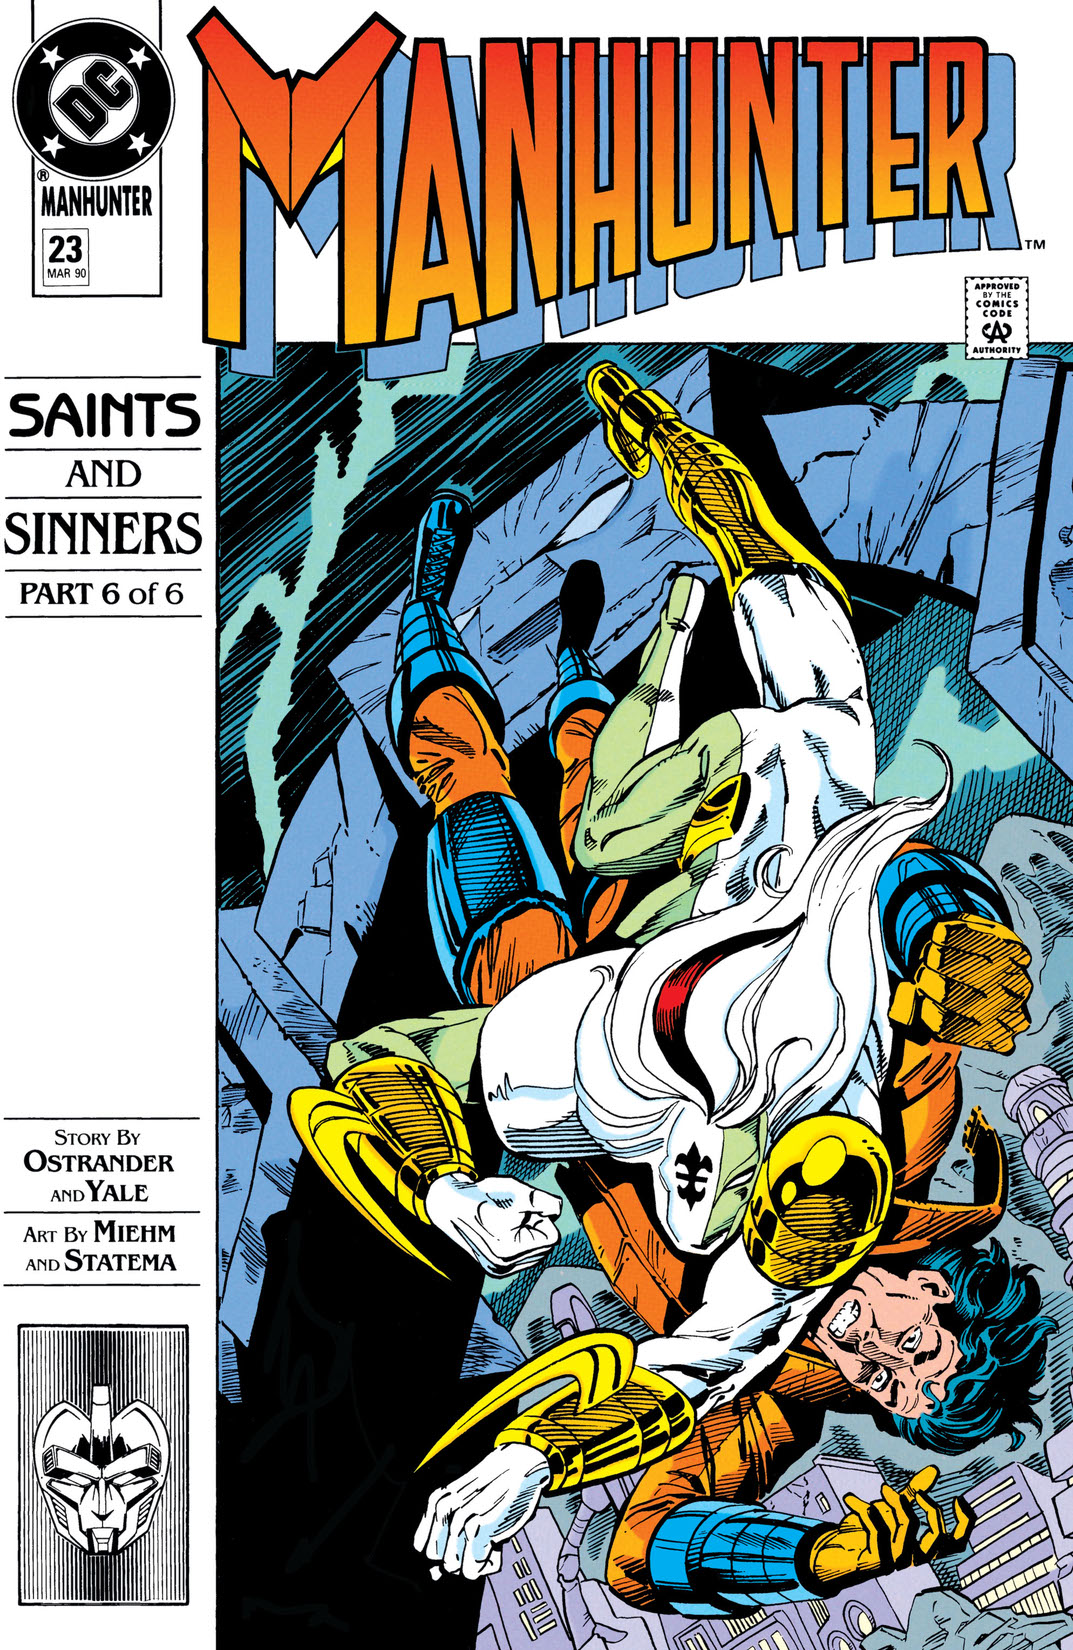 Manhunter (1988-1990) #23 preview images